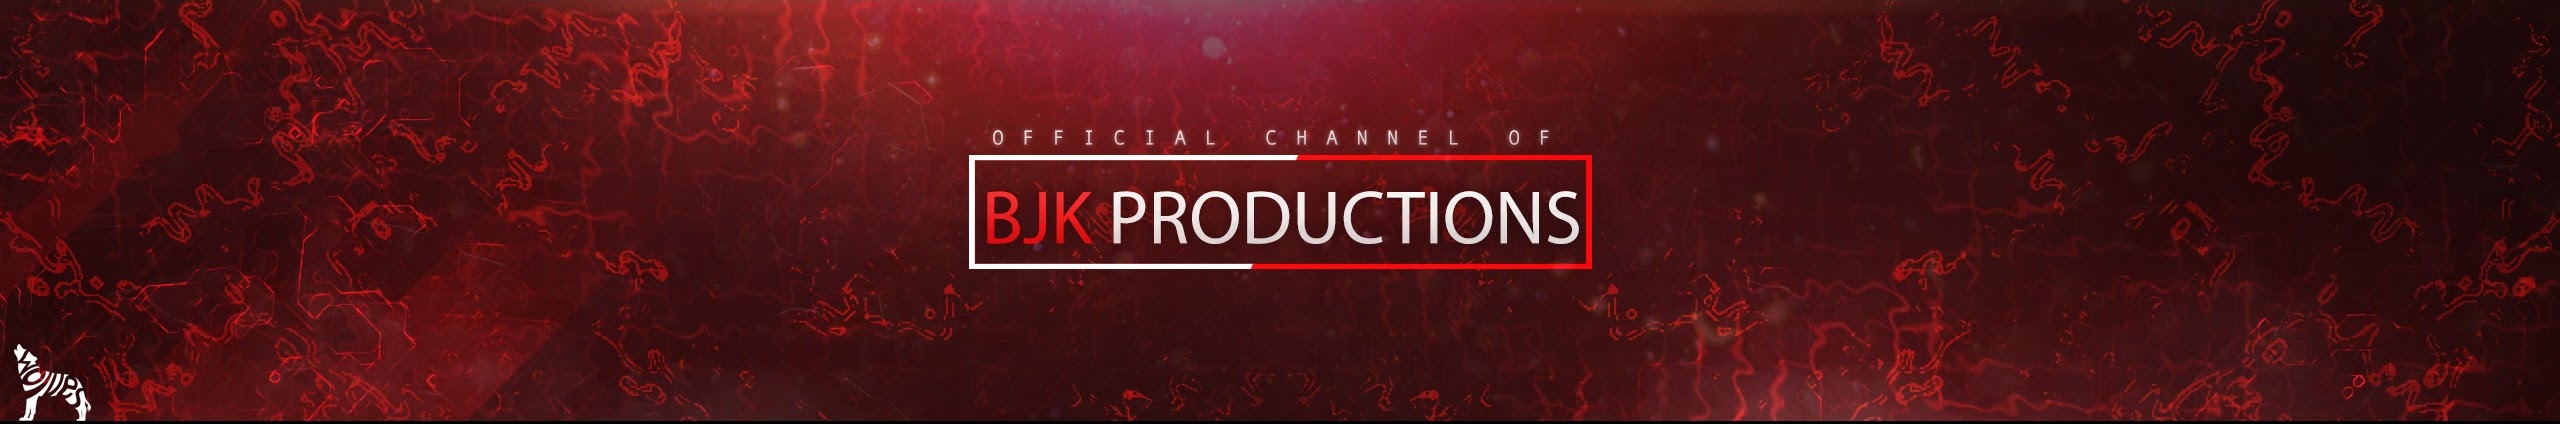 Bjk Productions Youtube Channel Analytics And Report Powered By Noxinfluencer Mobile